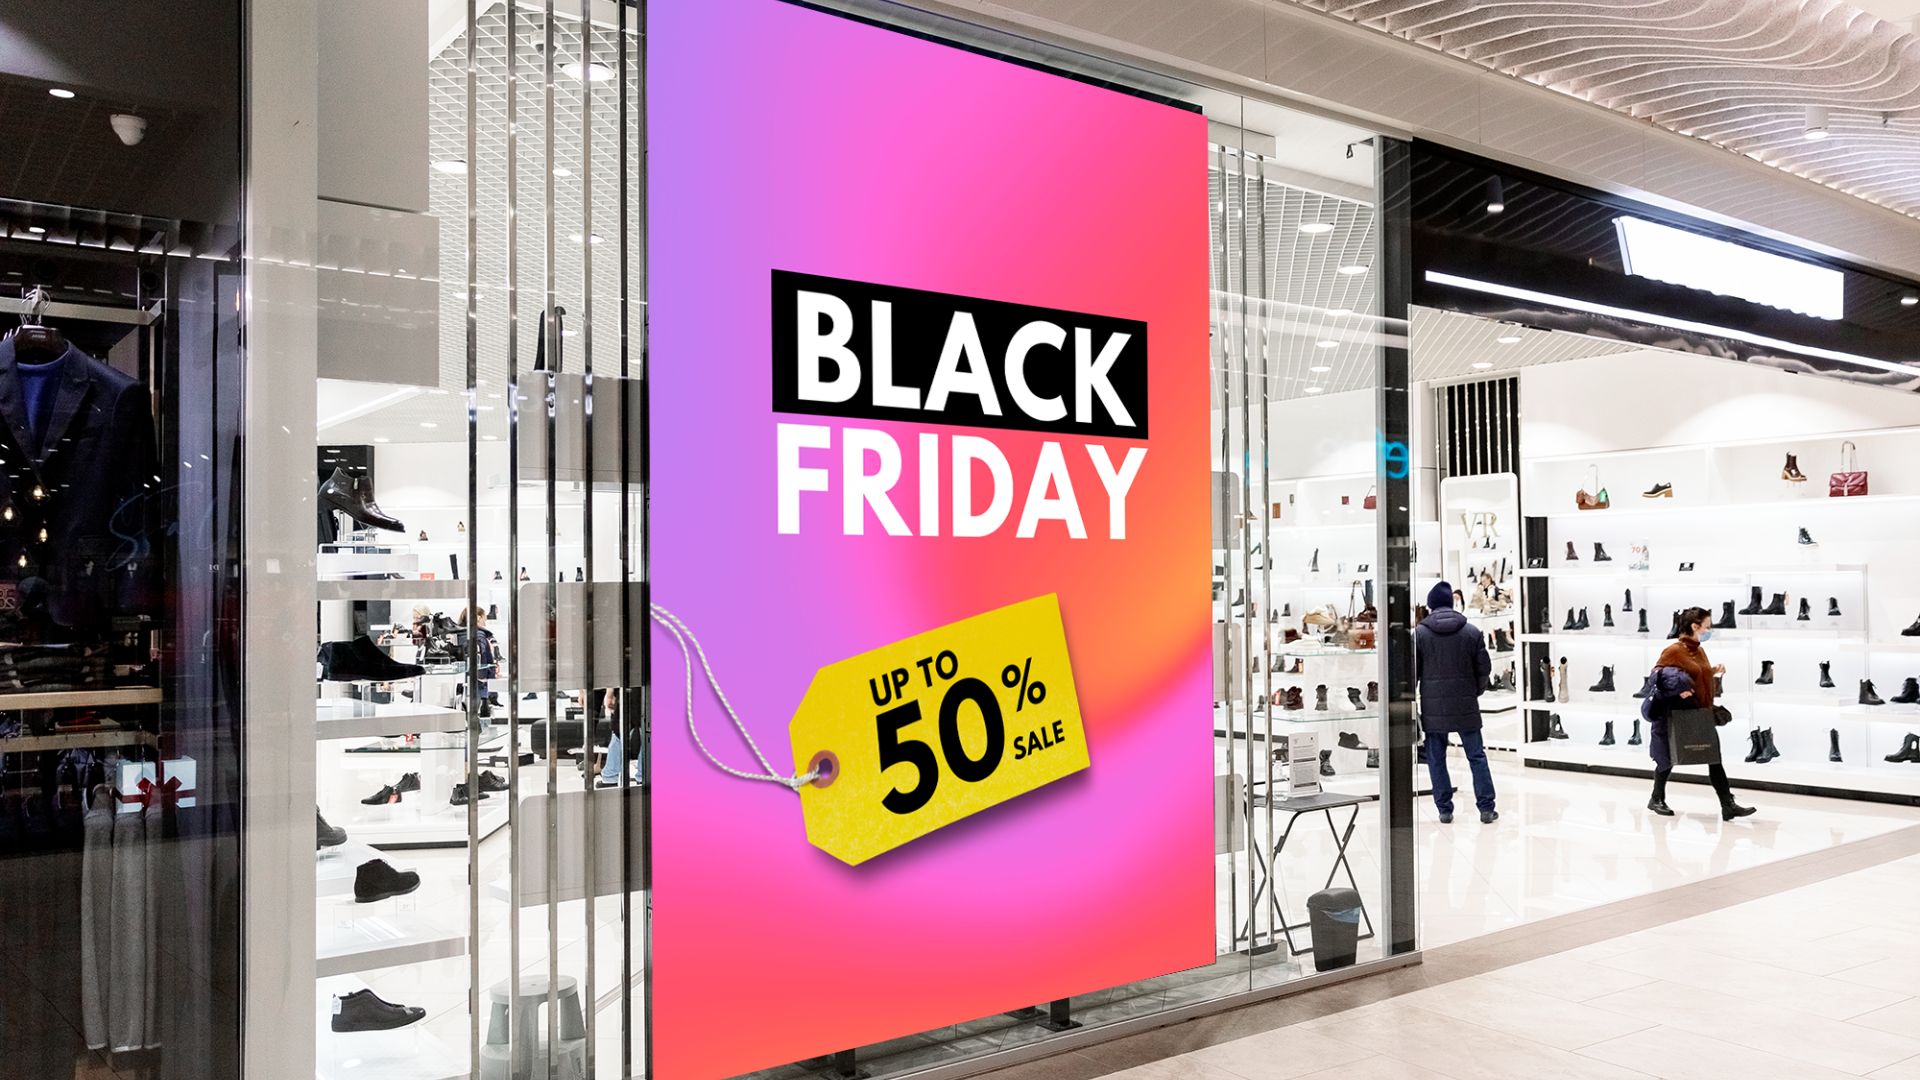 Black Friday Content Ideas for Retail Sales